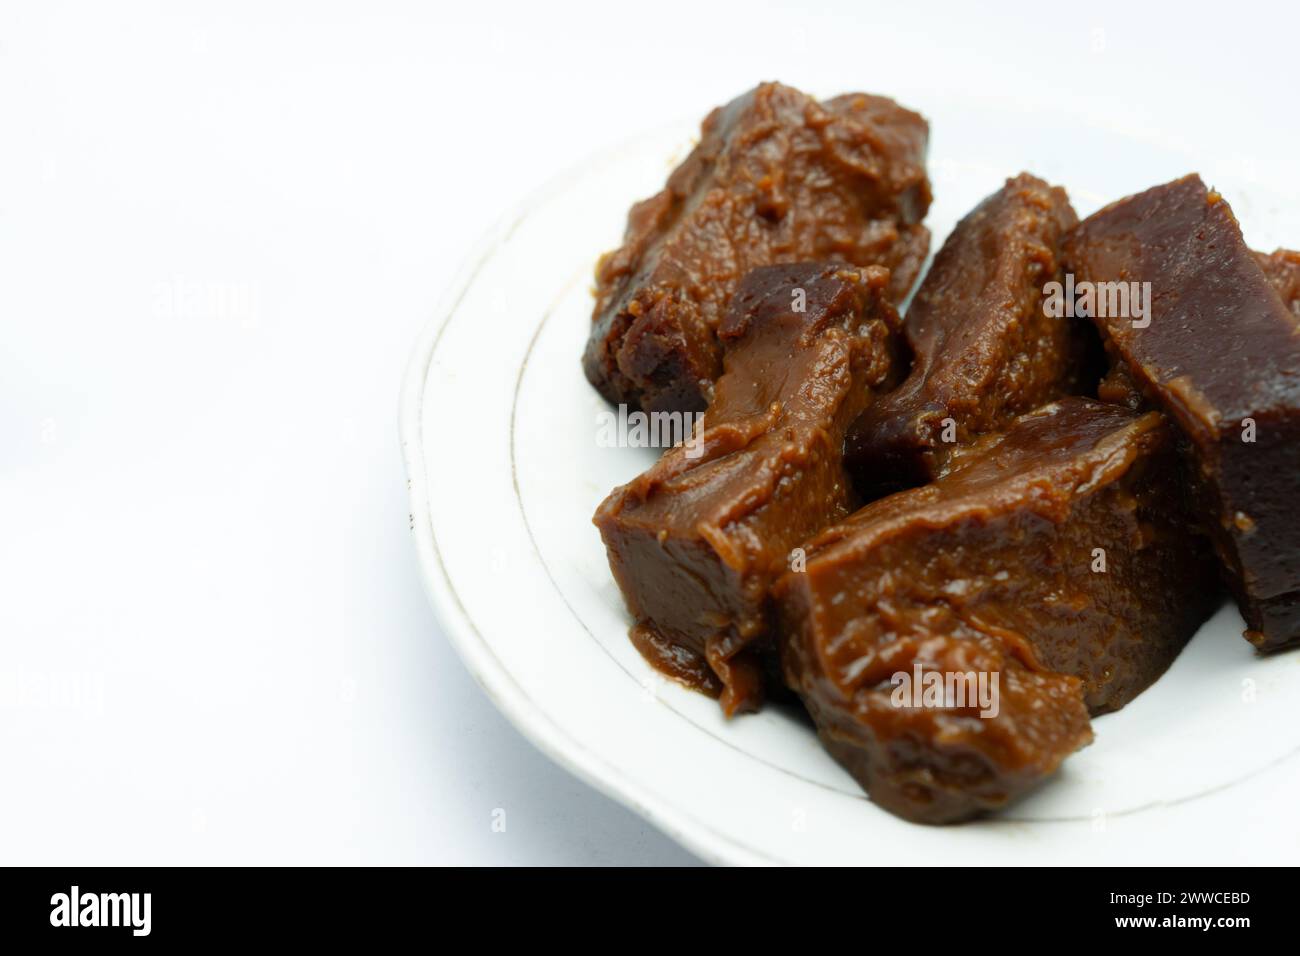 Dodol on a serving plate. This traditional sweet snack originating from Indonesia made from glutinous rice flour, coconut milk and brown sugar that ar Stock Photo